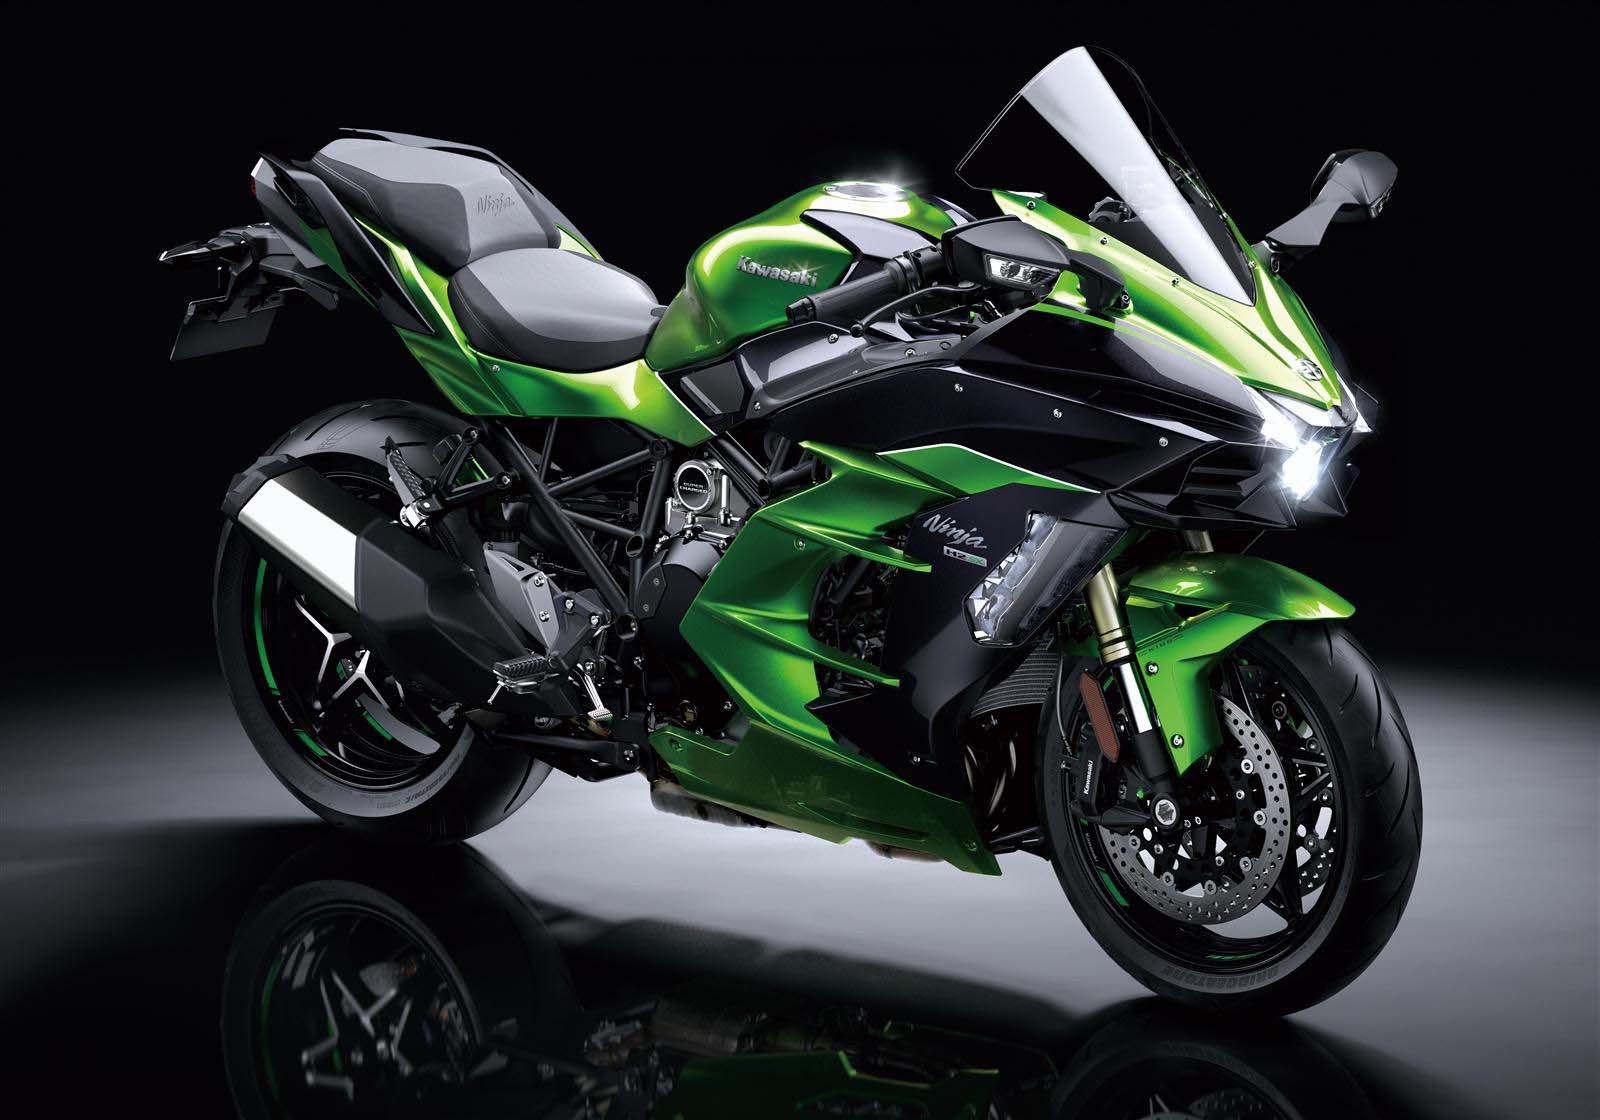 Things to Expect from the Kawasaki Ninja H2 SX - Motorcycle news, Motorcycle reviews from Malaysia, Asia and the world - BikesRepublic.com